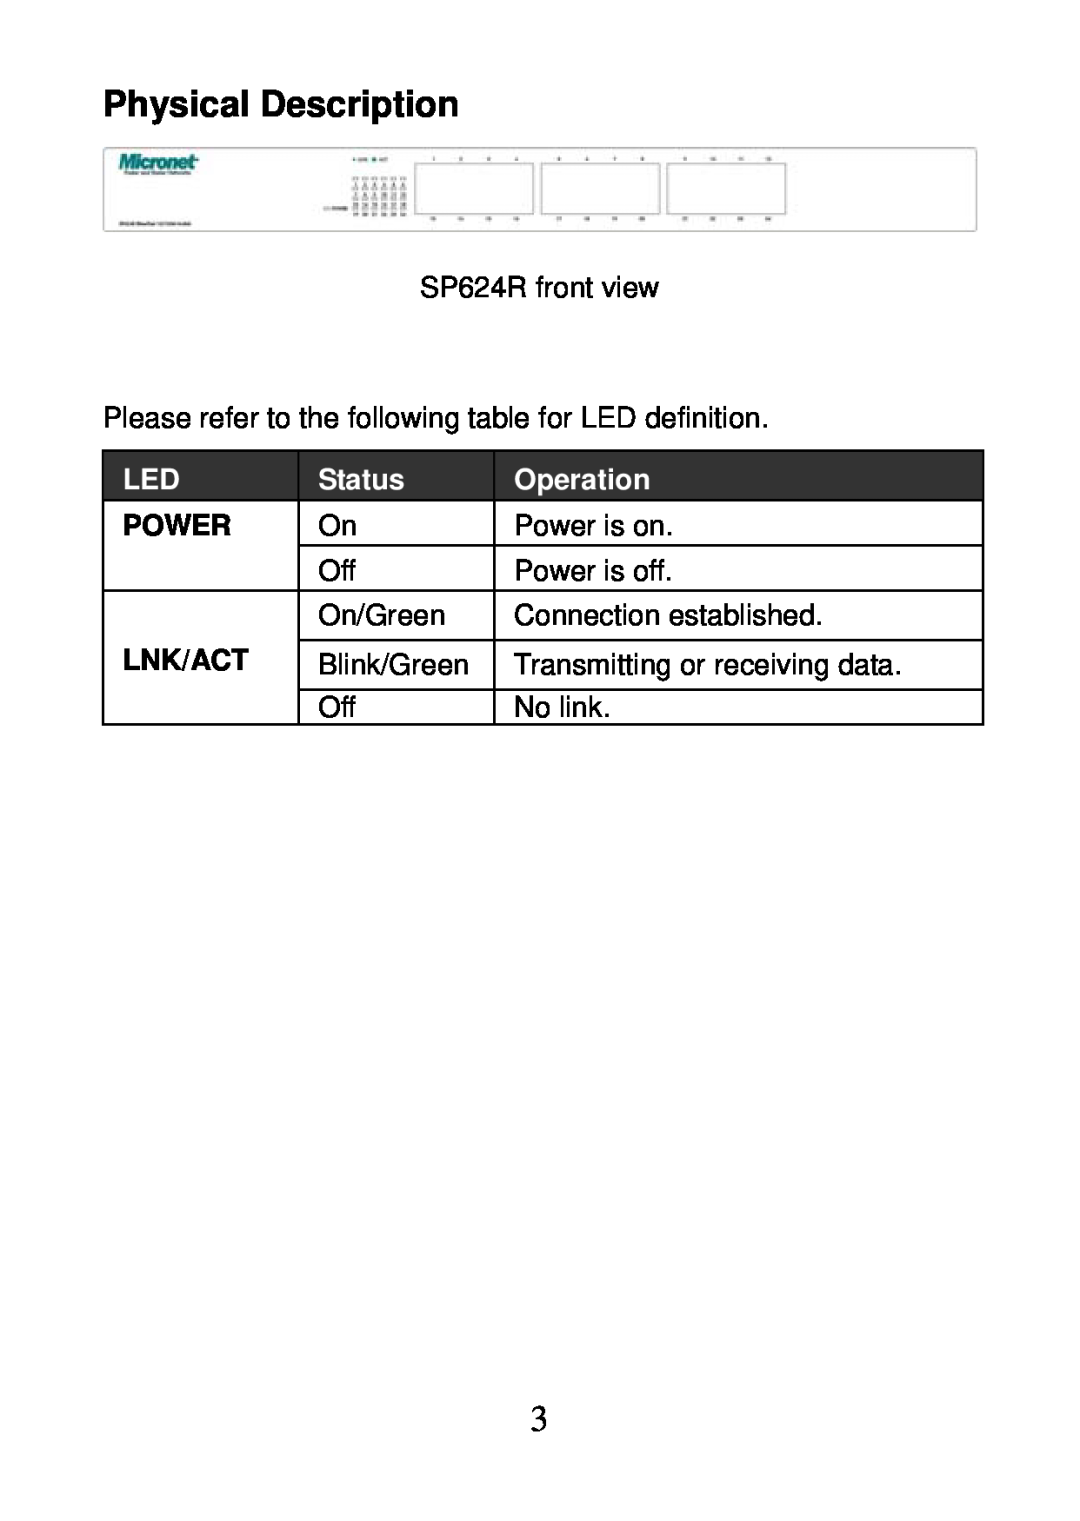 MicroNet Technology SP624R manual Physical Description, Power, Lnk/Act, Status, Operation 